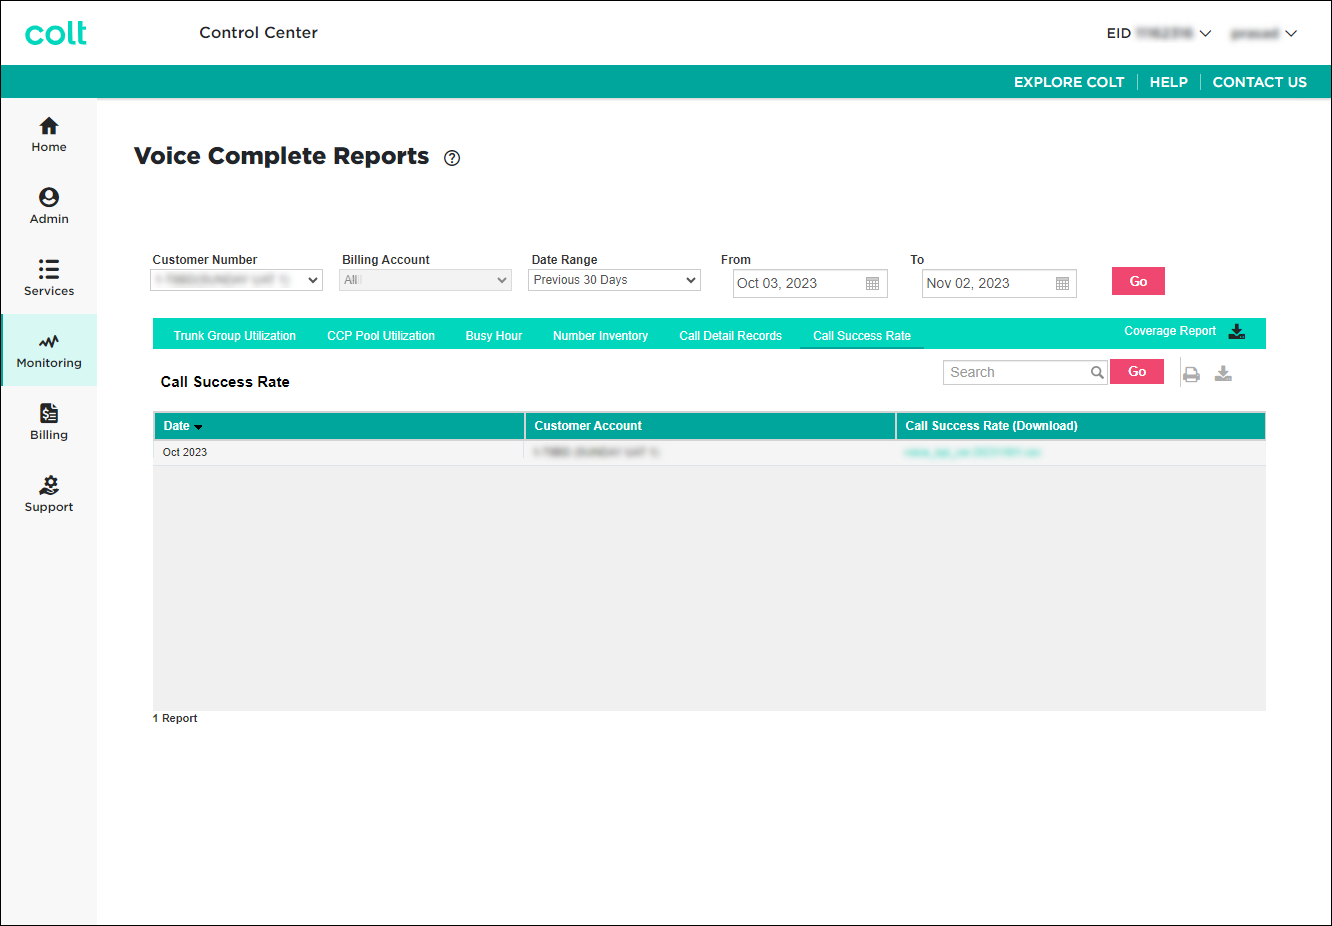 Voice Complete Reports (showing Call Success Rate)